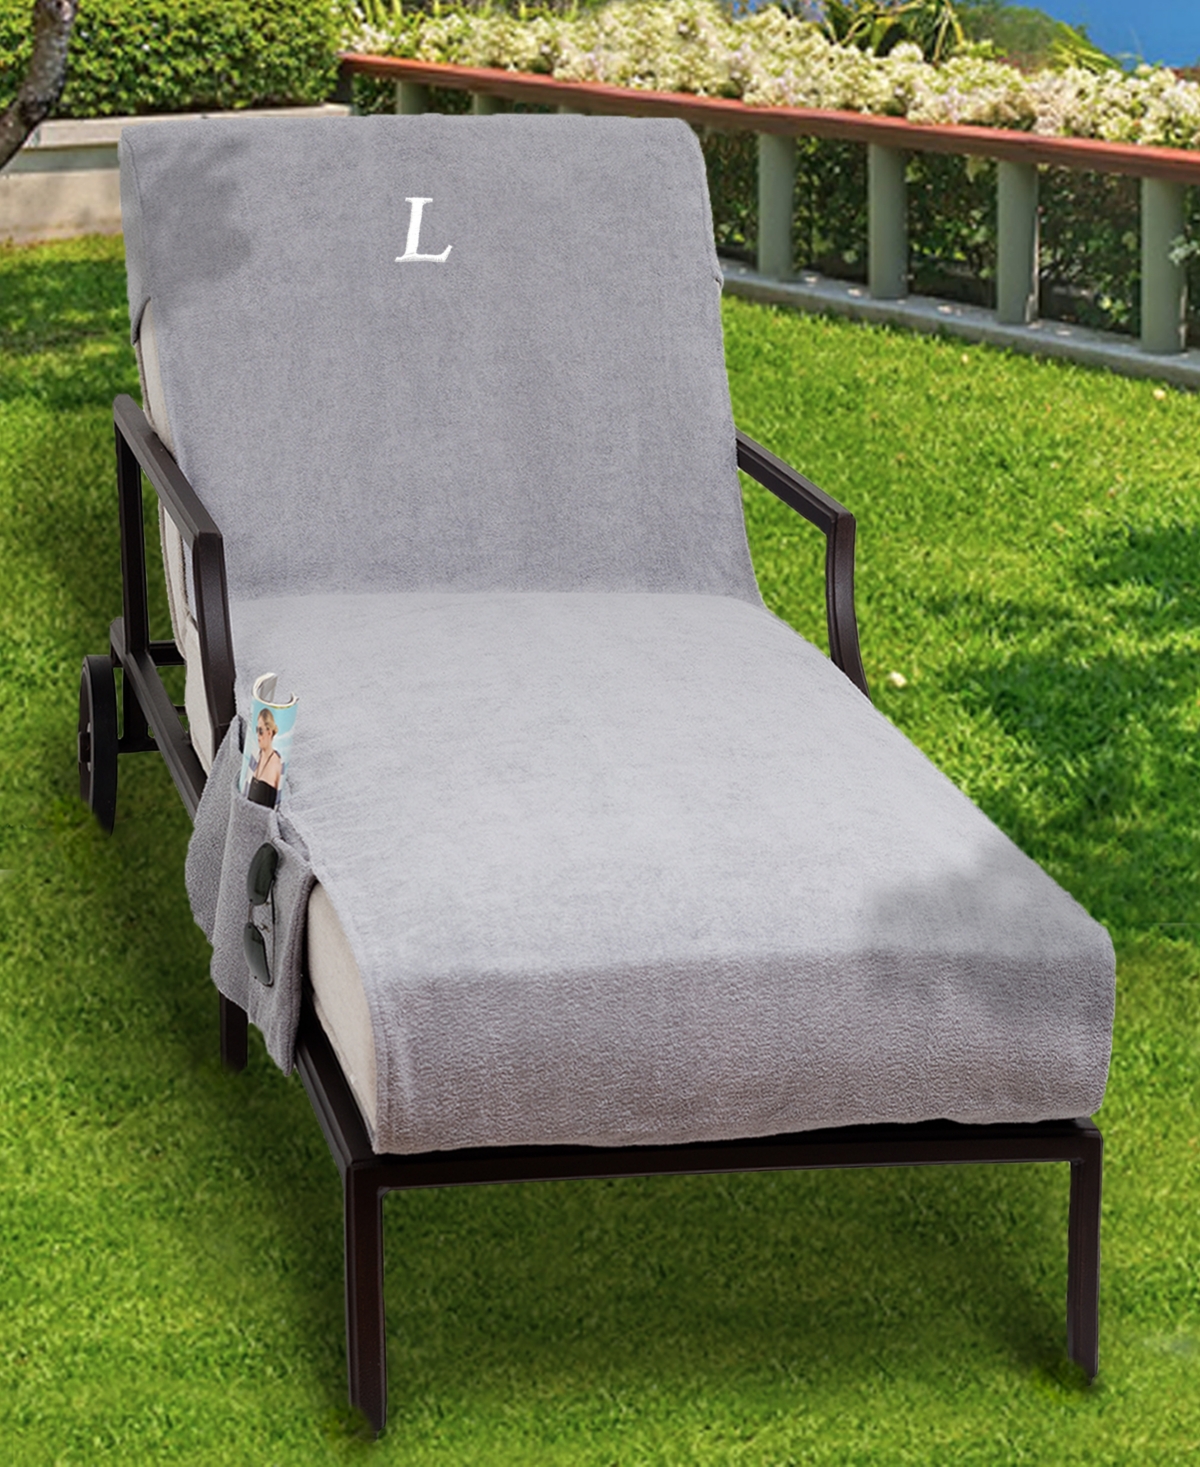 Personalized Standard Size 100% Turkish Cotton Chaise Lounge Cover with Side Pockets - Z